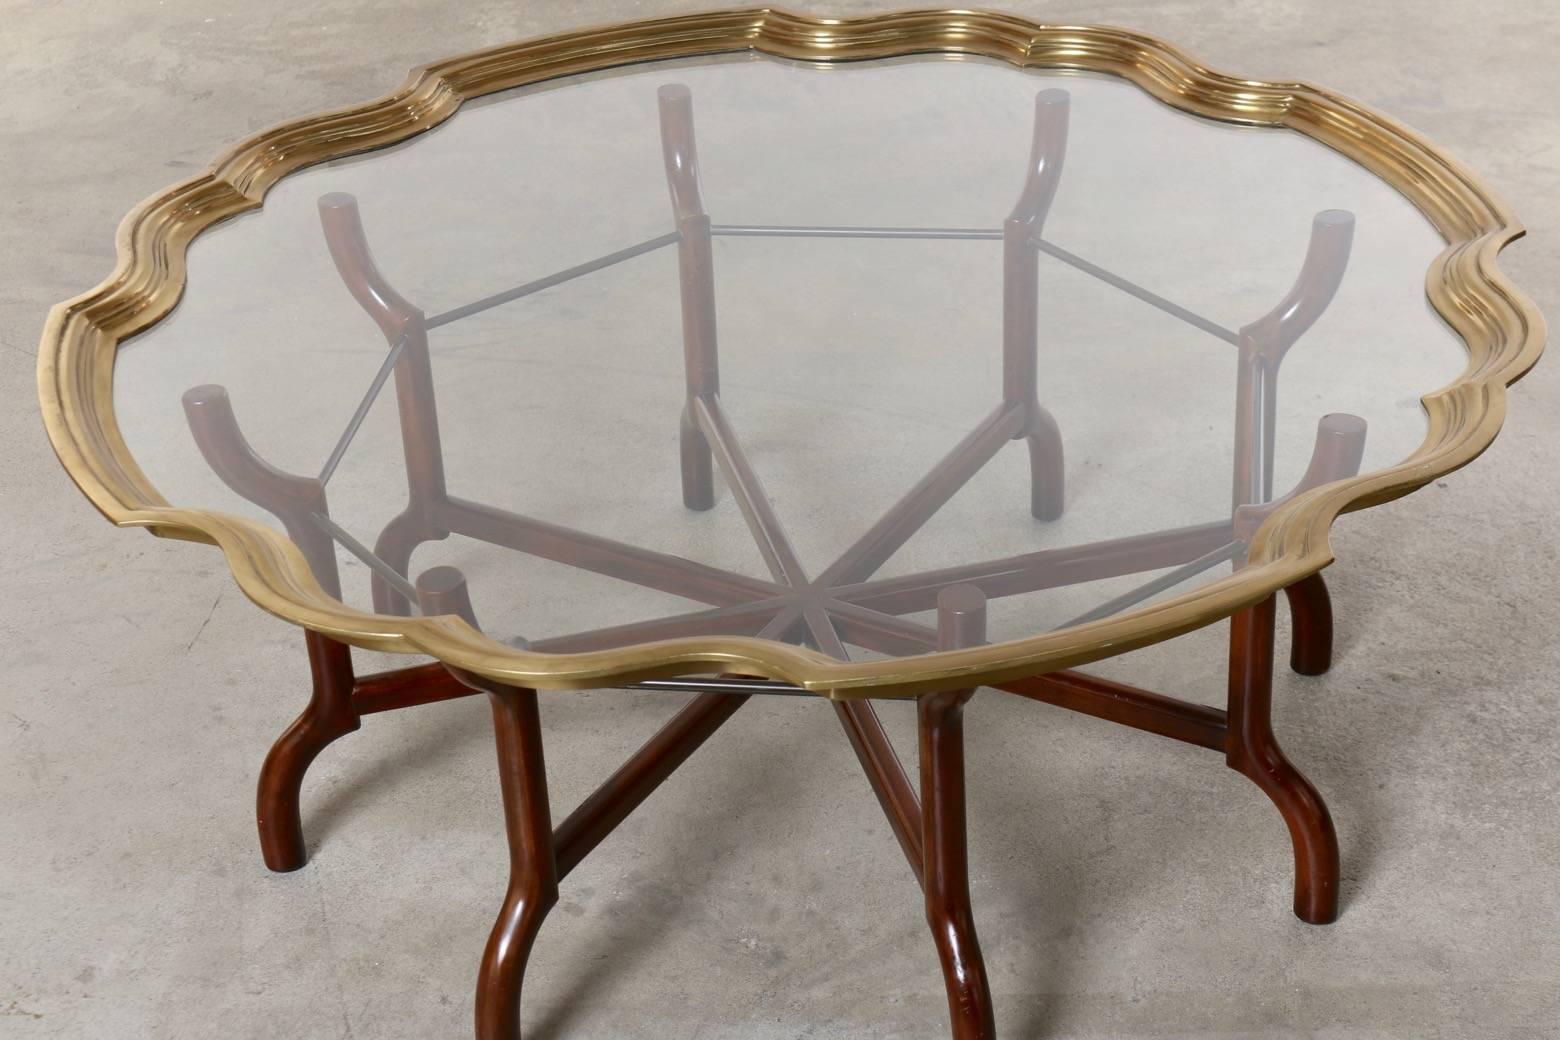 Architectural styling and artistry were combined by Baker to create this unique and stunning version of the classic tray top coffee table.  The brass is artfully cast to create a ribbon effect, holding the glass.  The design of the folding base